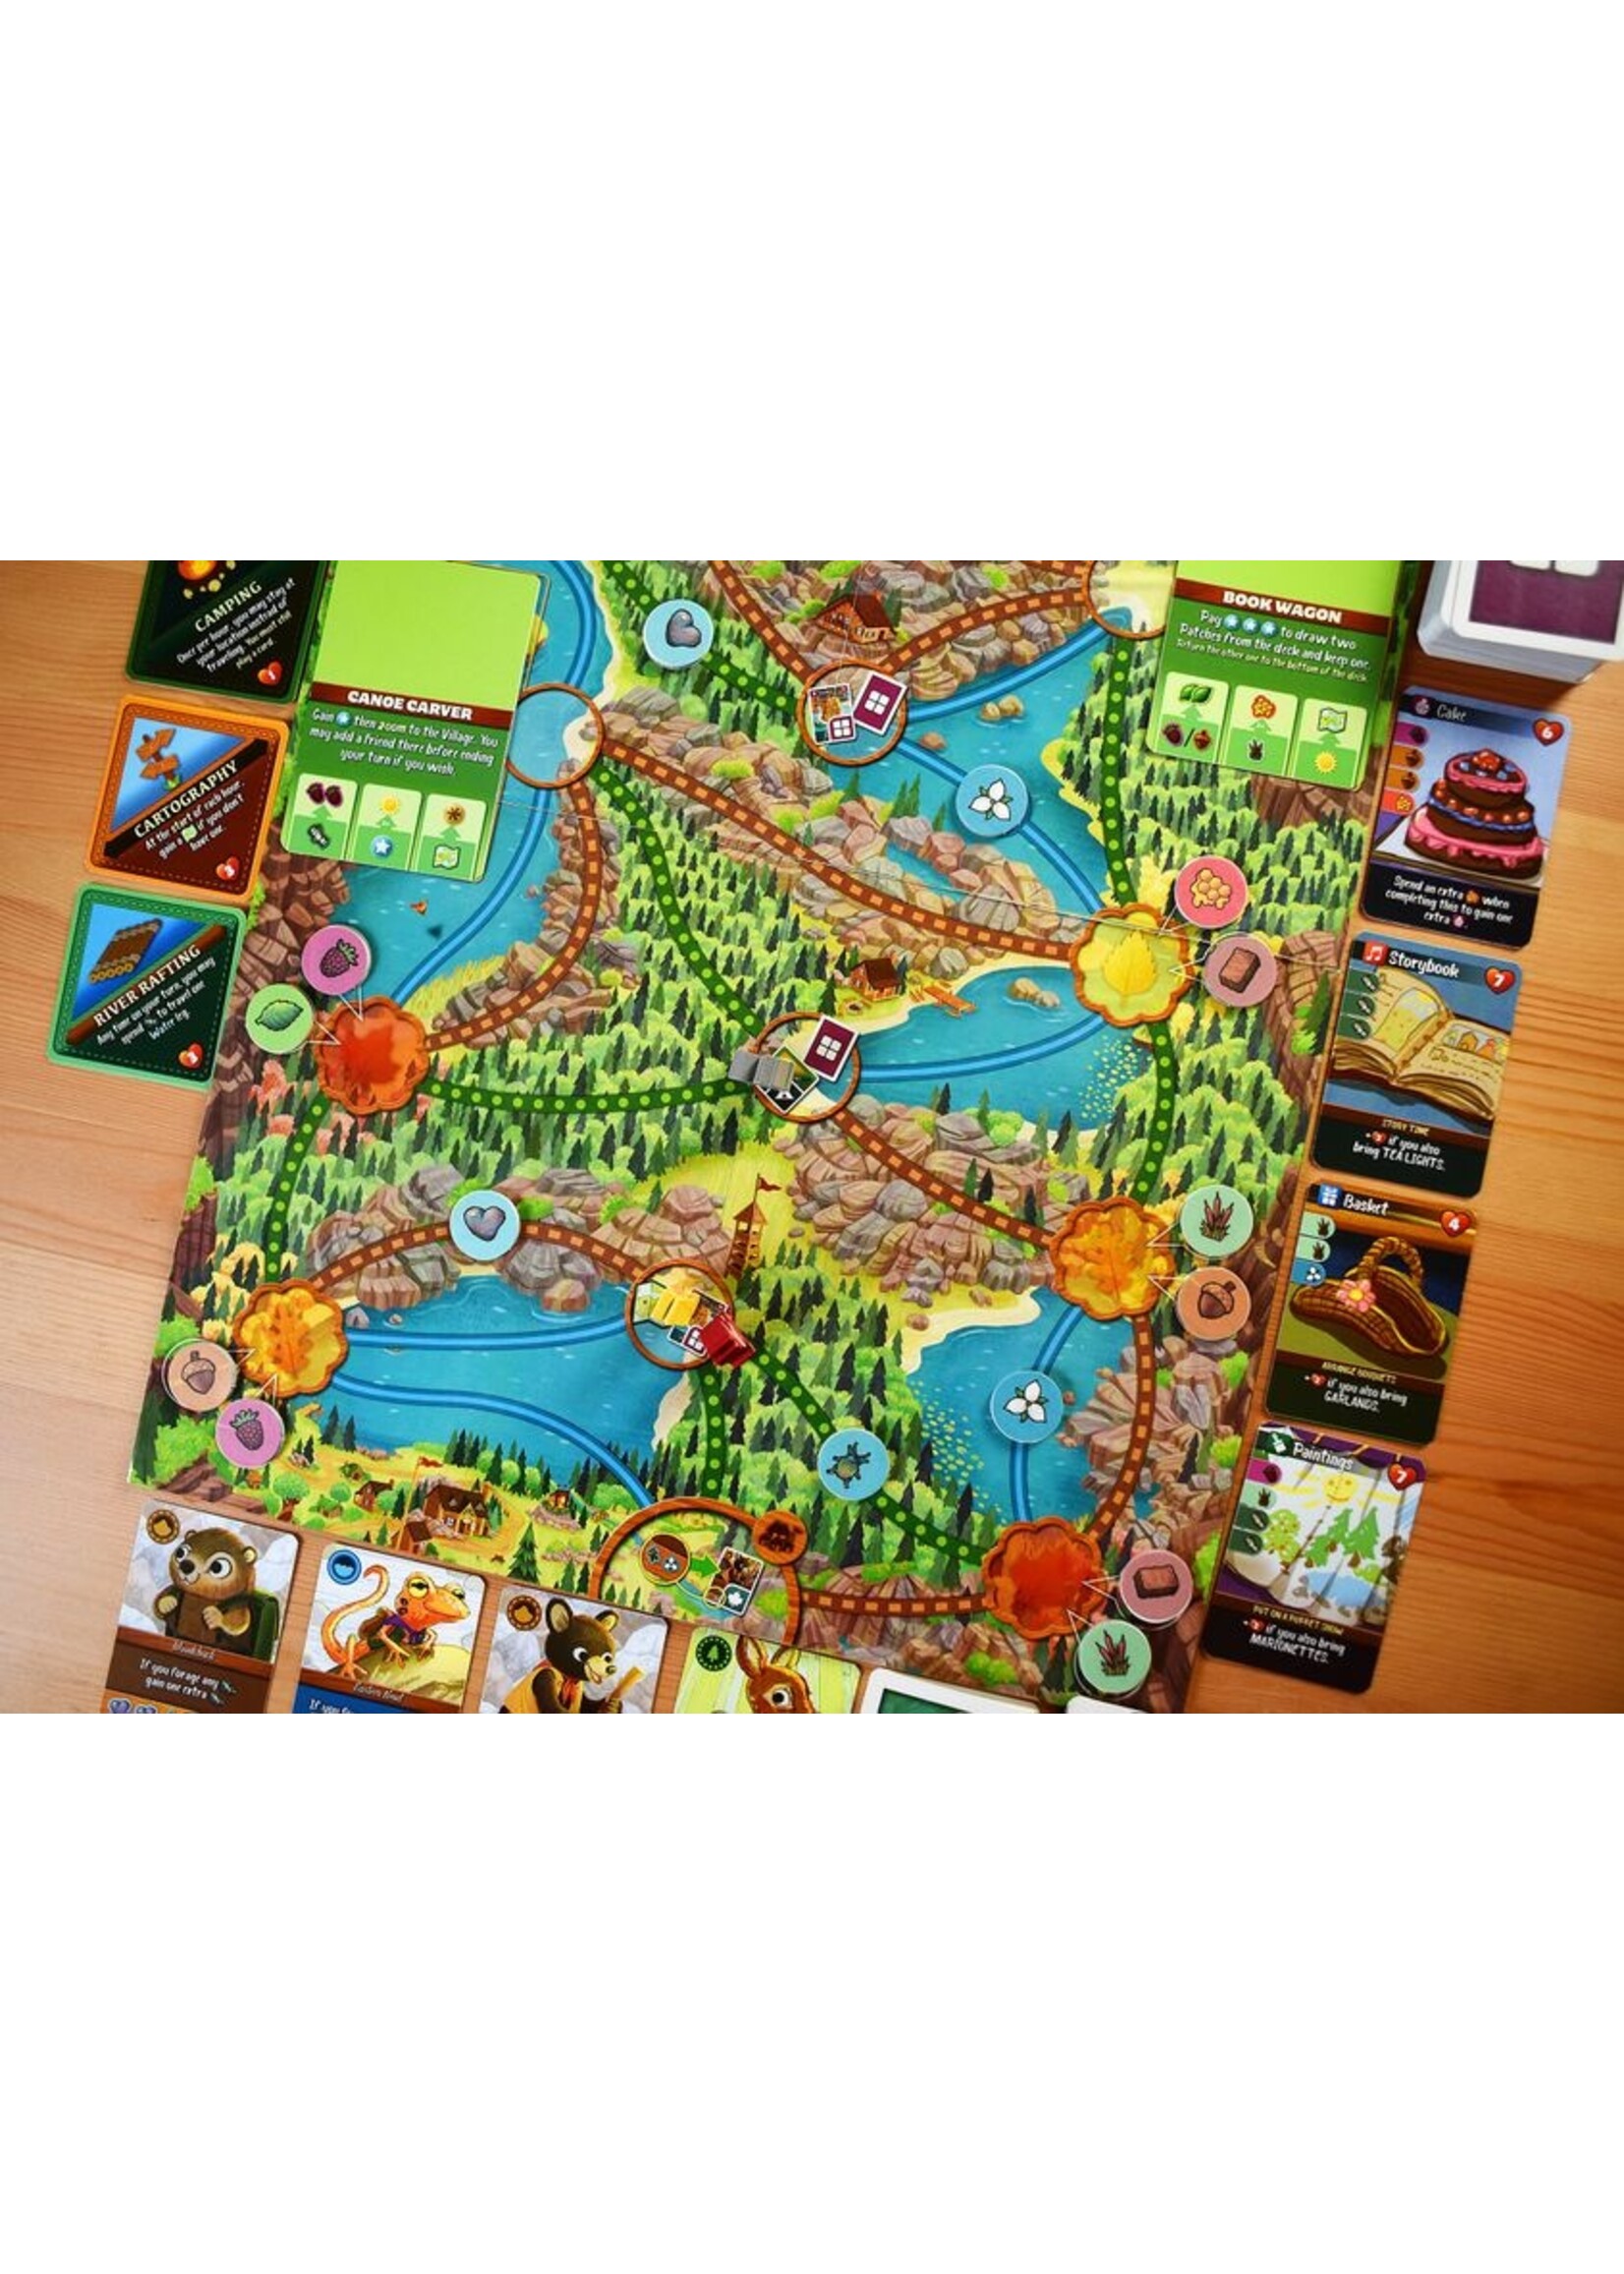 Kids Table Board Gaming Maple Valley: A Creature Comforts Game